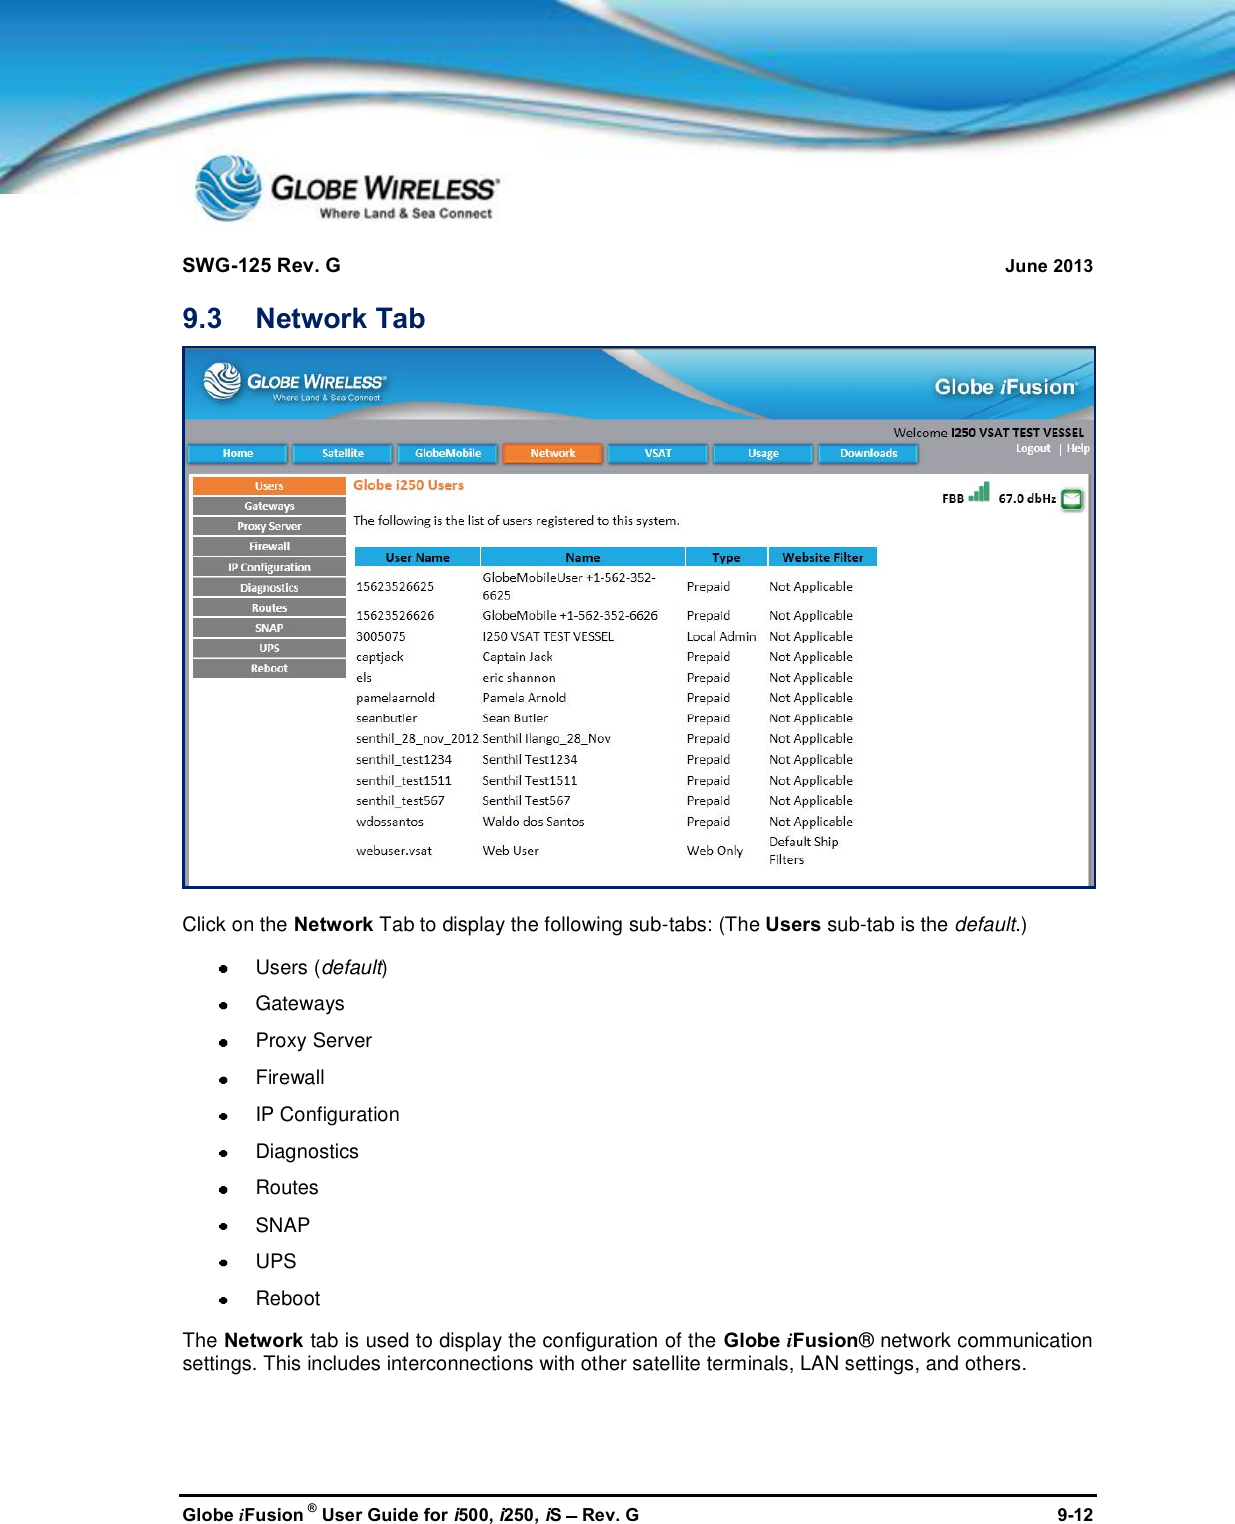 SWG-125 Rev. G June 2013Globe iFusion ®User Guide for i500, i250, iSRev. G 9-129.3 Network TabClick on the Network Tab to display the following sub-tabs: (The Users sub-tab is the default.)Users (default)GatewaysProxy ServerFirewallIP ConfigurationDiagnosticsRoutesSNAPUPSRebootThe Network tab is used to display the configuration of the Globe iFusion® network communicationsettings. This includes interconnections with other satellite terminals, LAN settings, and others.